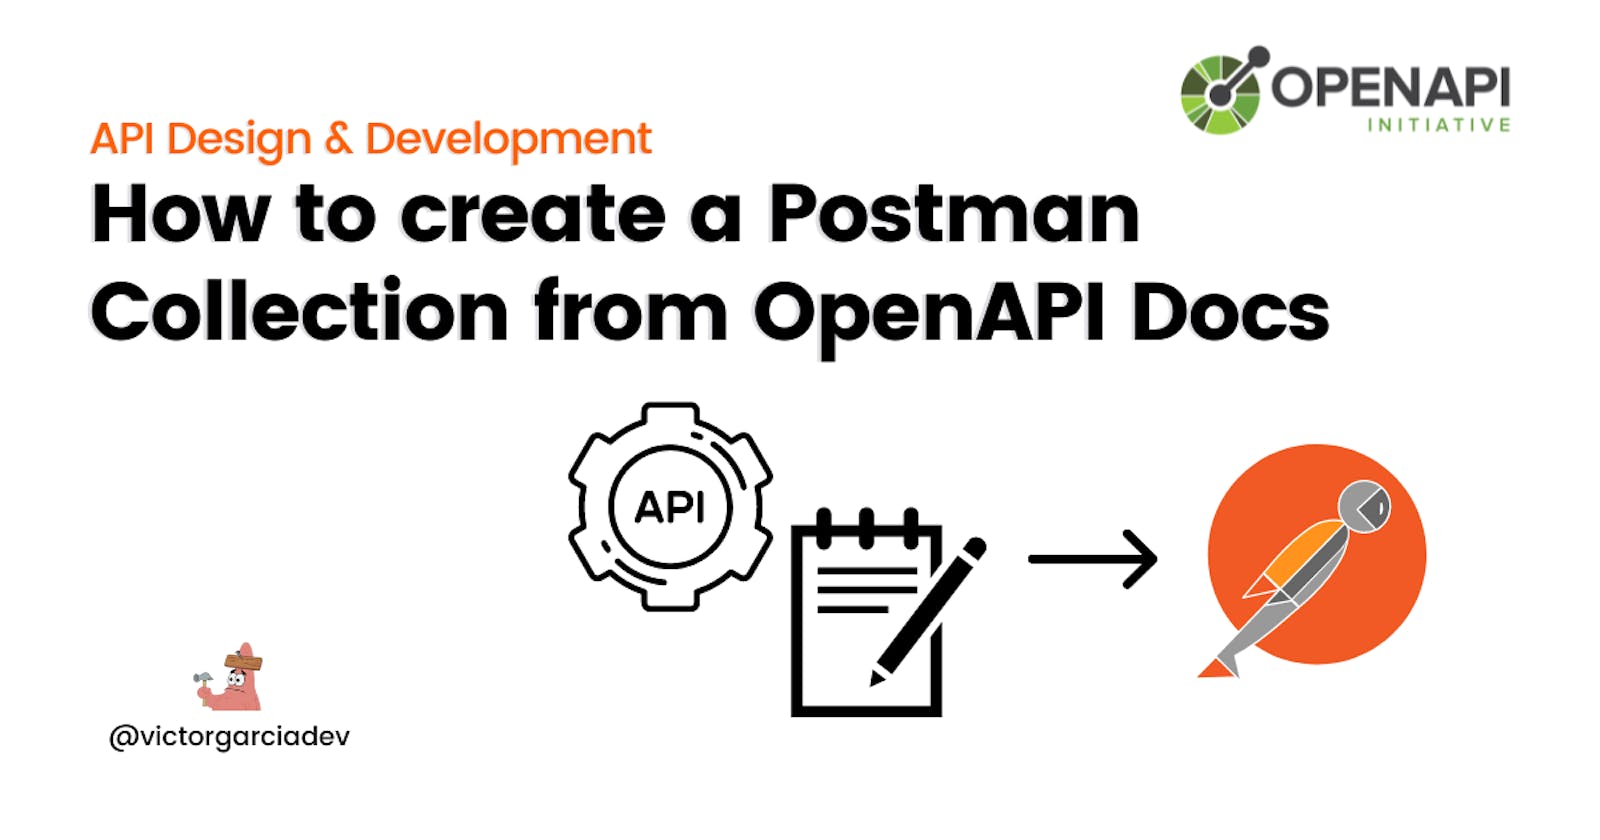 How to create a Postman Collection from OpenAPI Docs